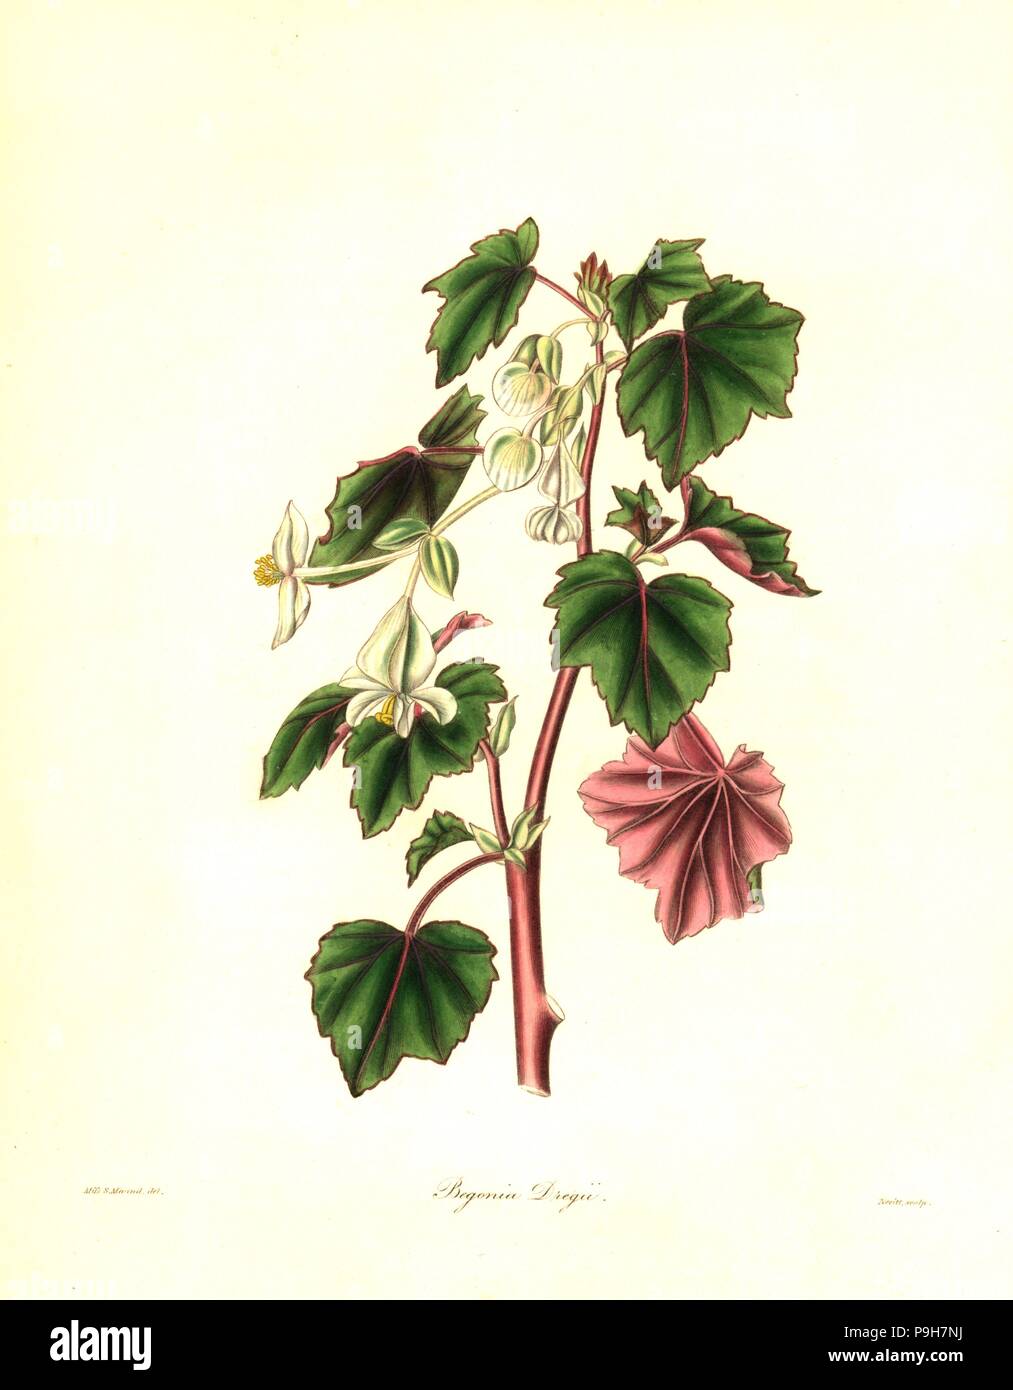 Drege's begonia, Begonia dregei. Handcoloured copperplate engraving by S. Nevitt after a botanical illustration by Miss Sara Maund from Benjamin Maund and the Rev. John Stevens Henslow's The Botanist, London, 1836. Stock Photo